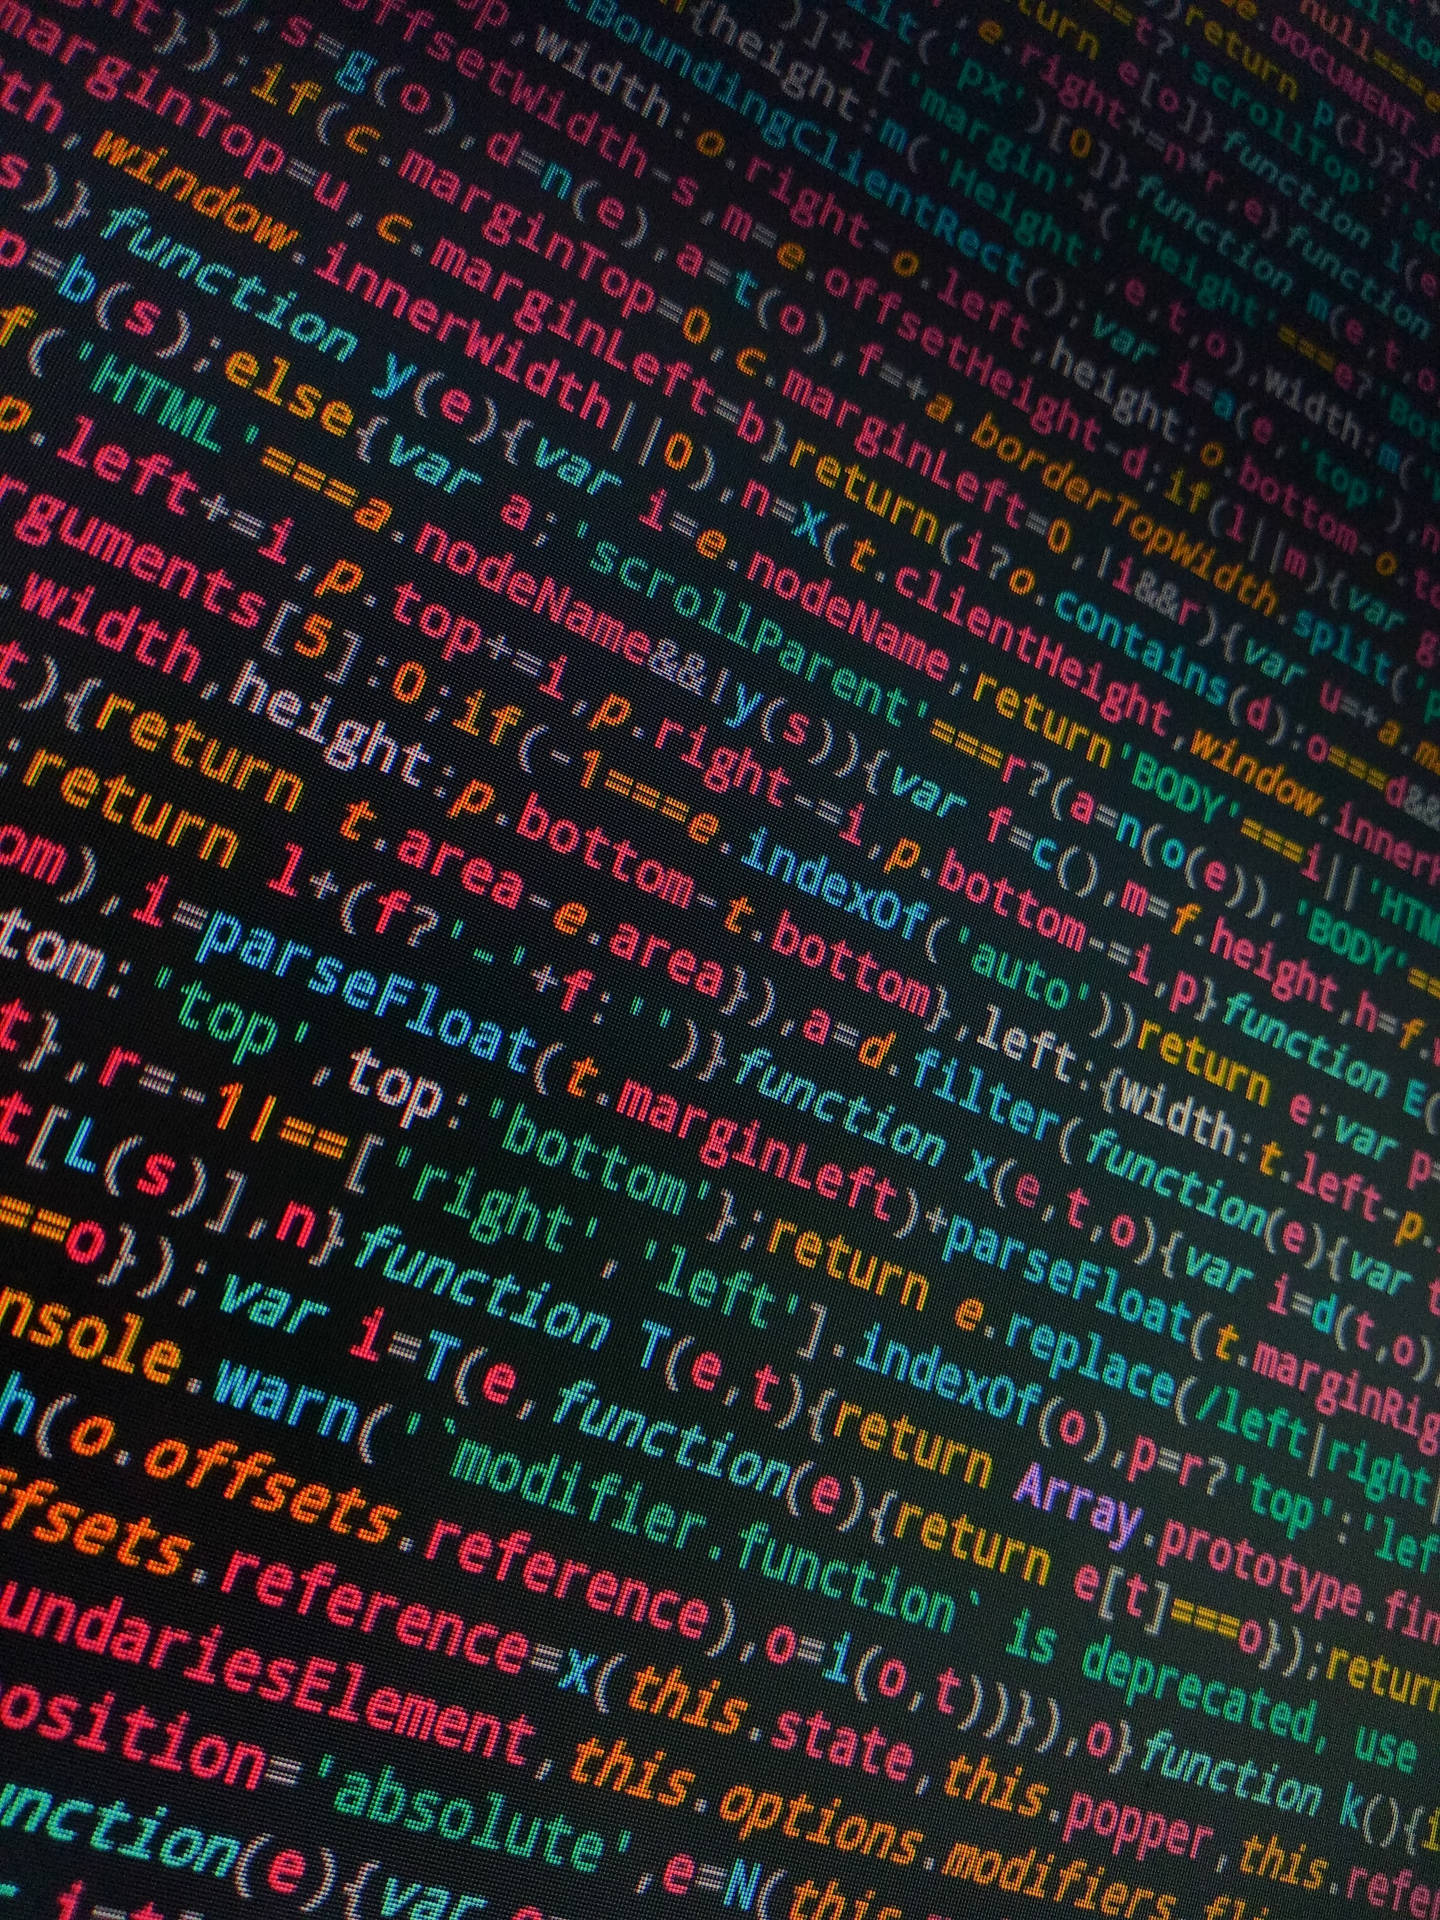 Writing colorful codes which can make the screen come alive. Wallpaper